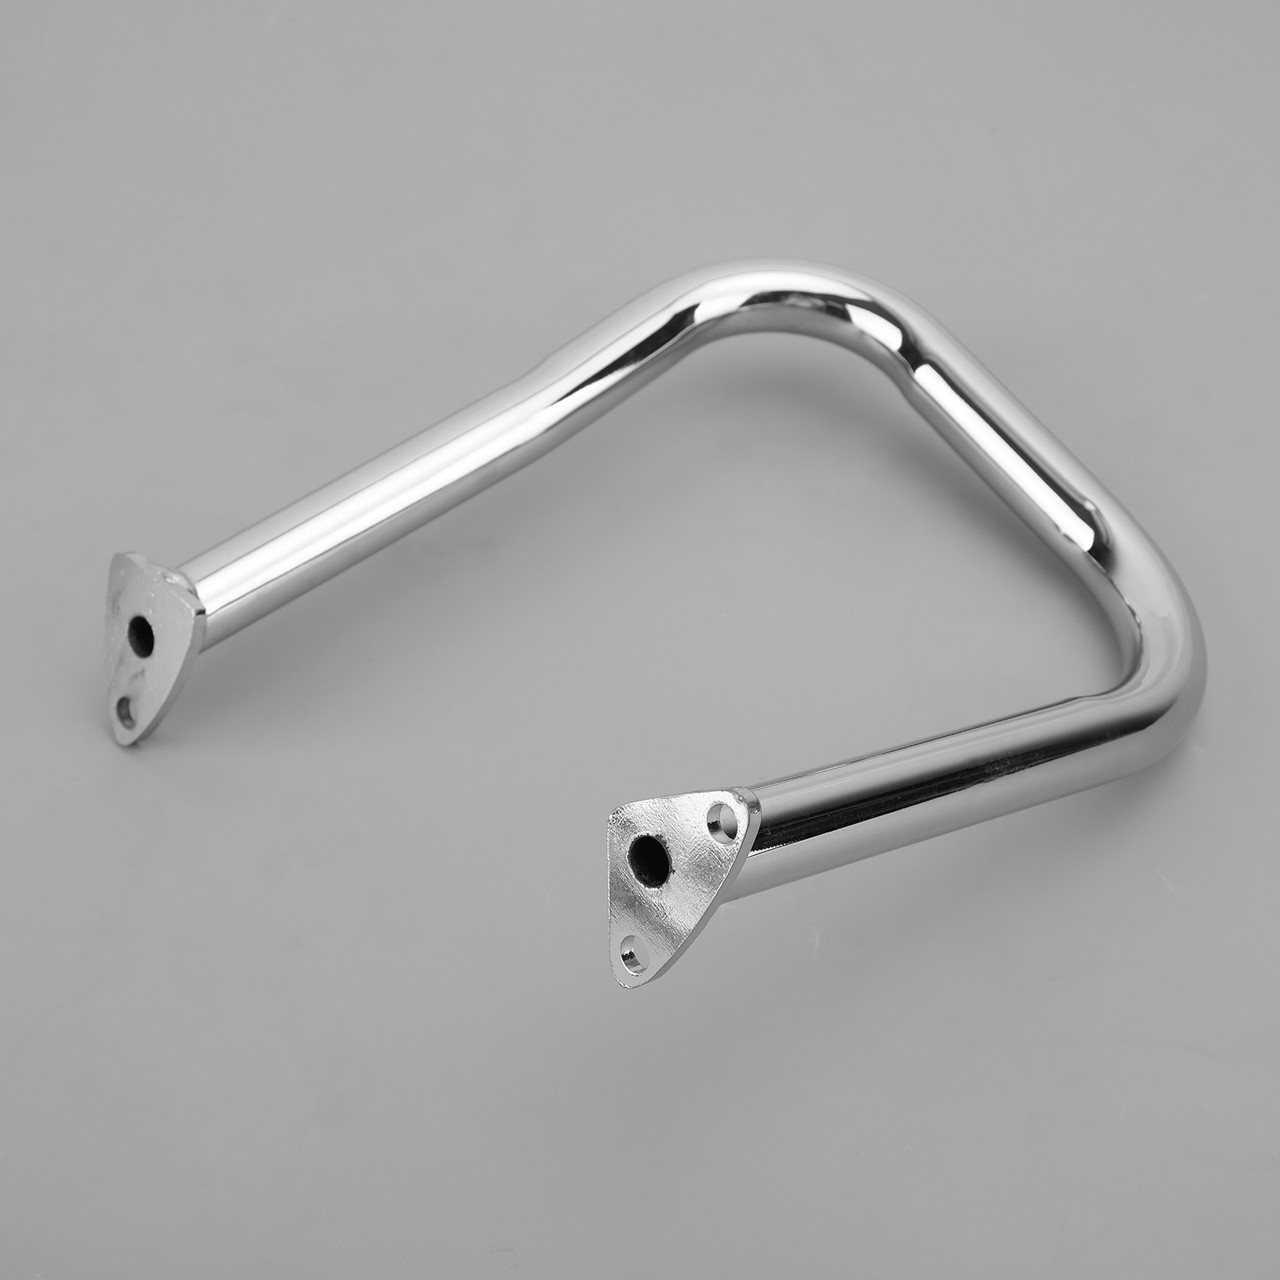 Rear Highway Bars Fit For Indian Chief Classic 14-18 Dark Horse 16-20 Chieftain Classic 18-20 Roadmaster 15-20 Springfield 16-20 Chrome